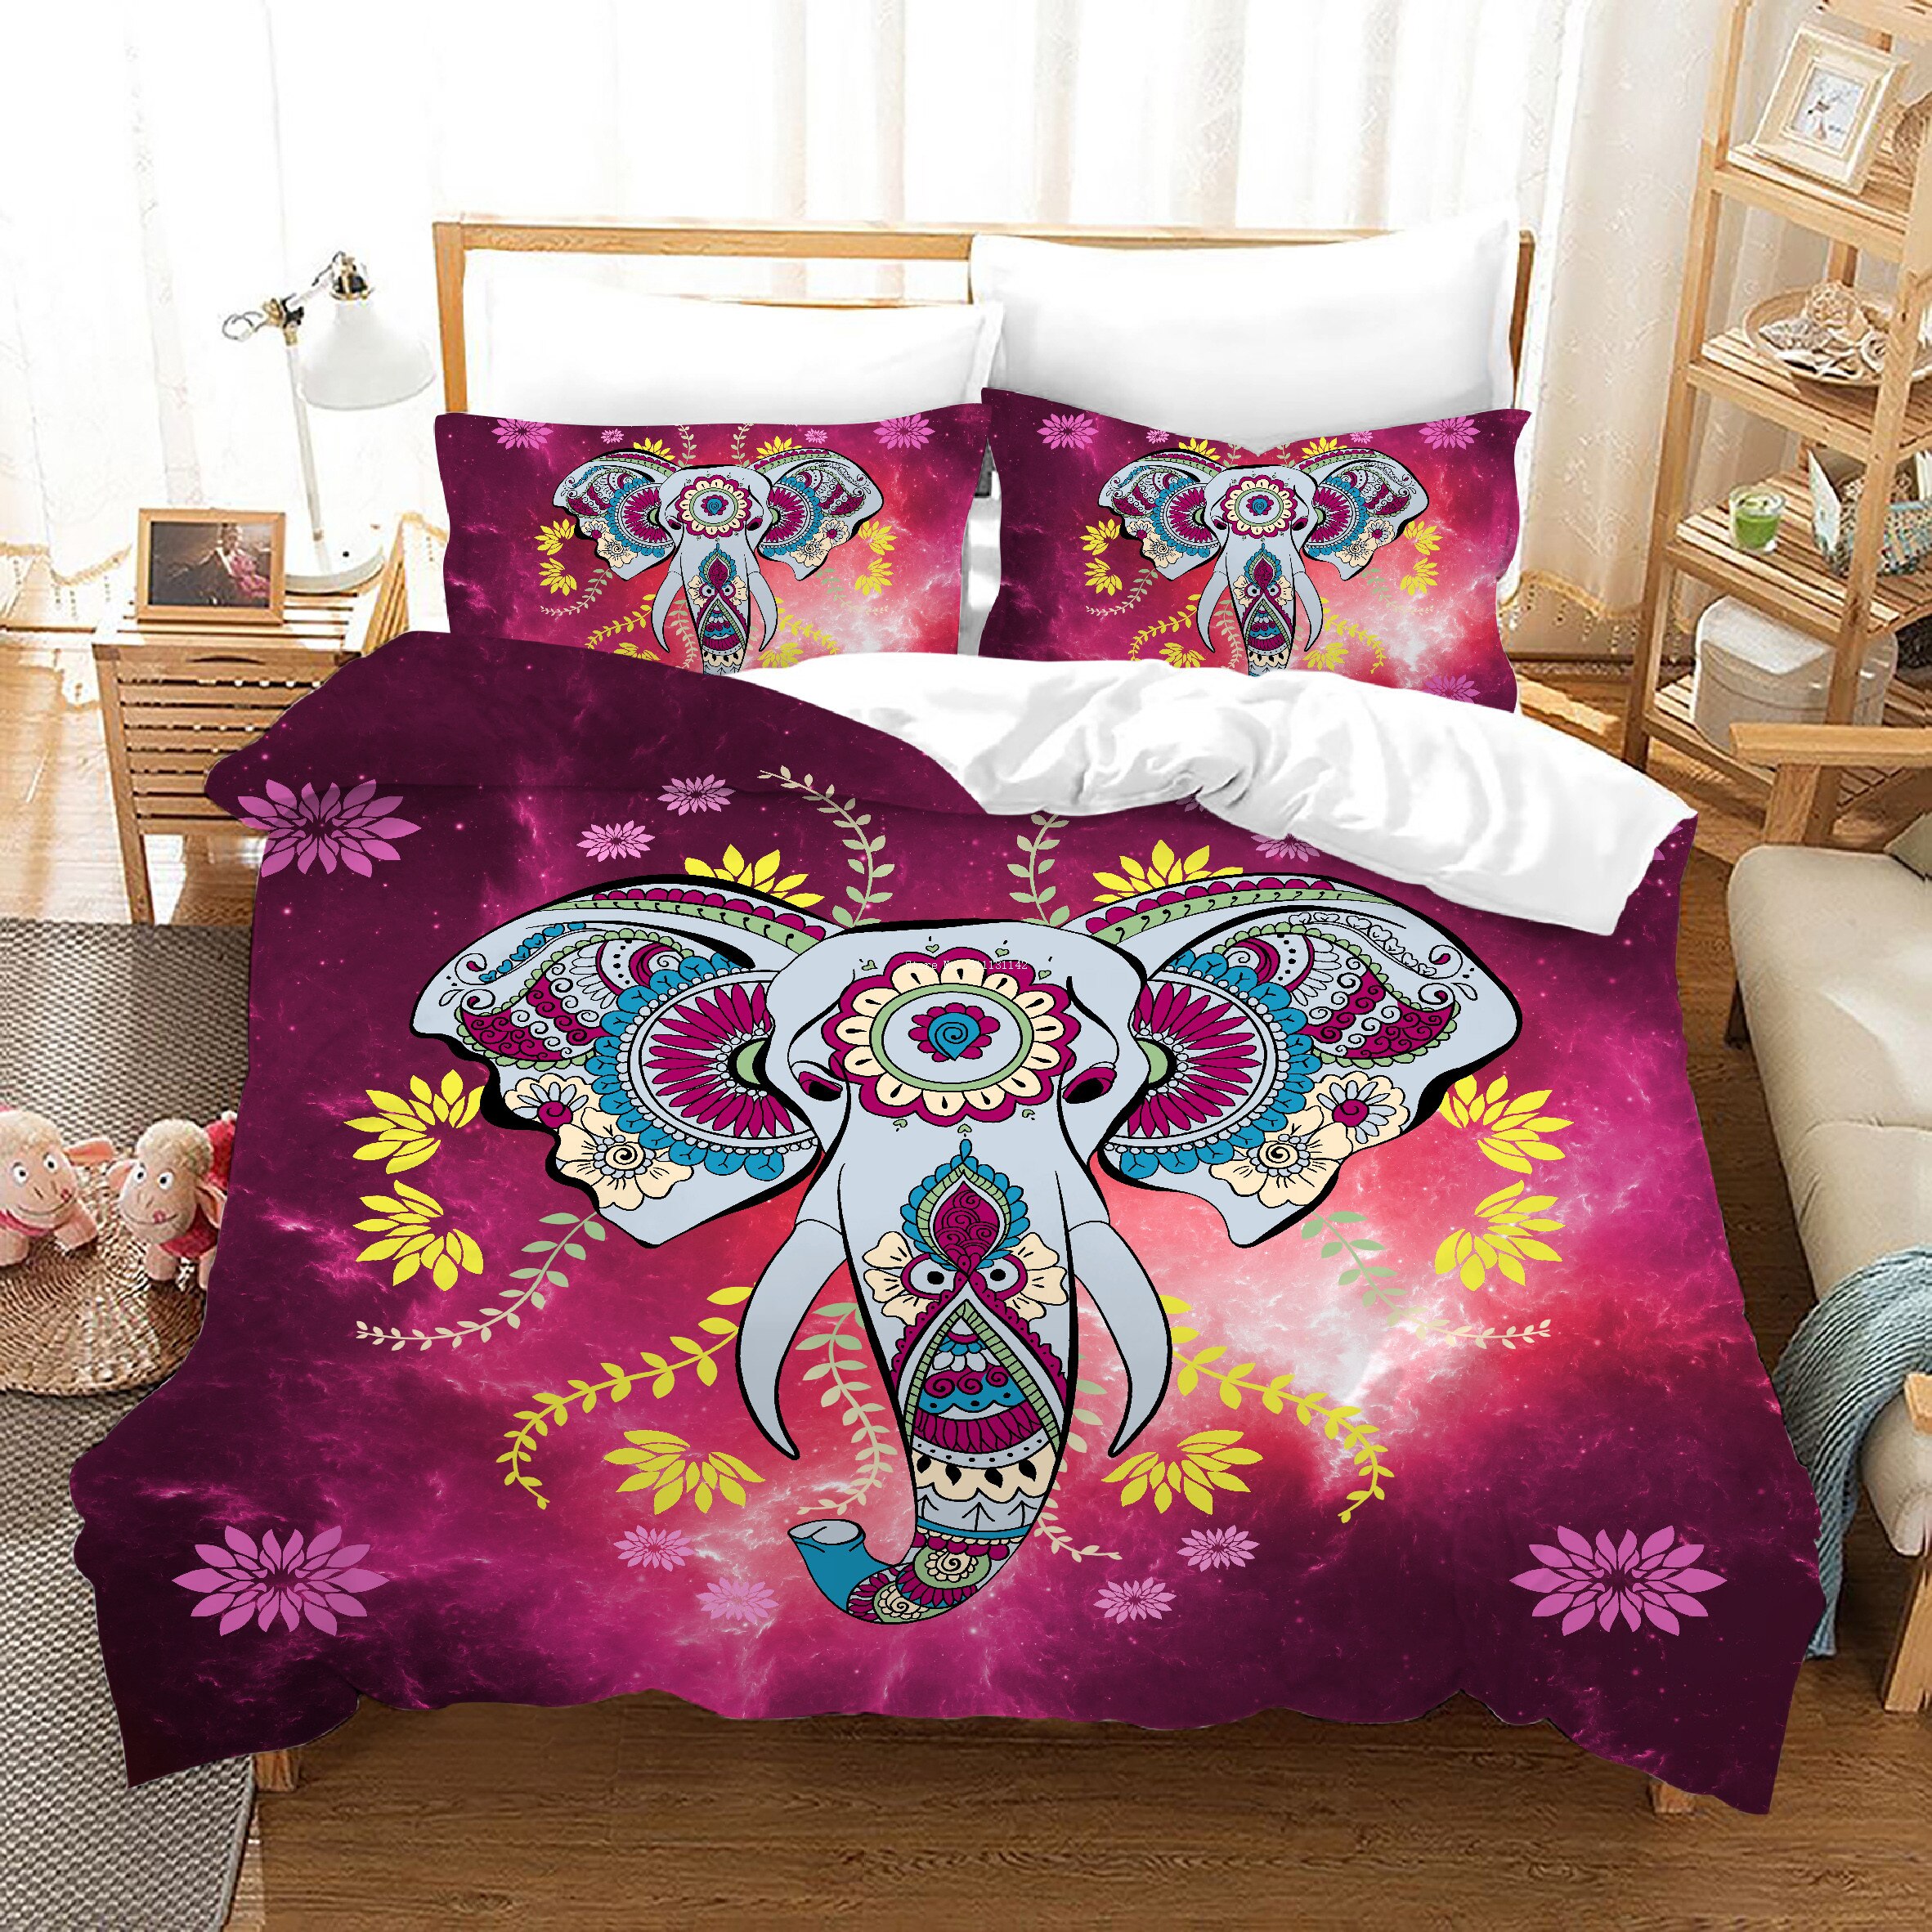 2/3PCS Colored Bohemian Animal Style Bedding Set Bedroom Decorations Warm and Comfortable Down Bedcover Pillowcase